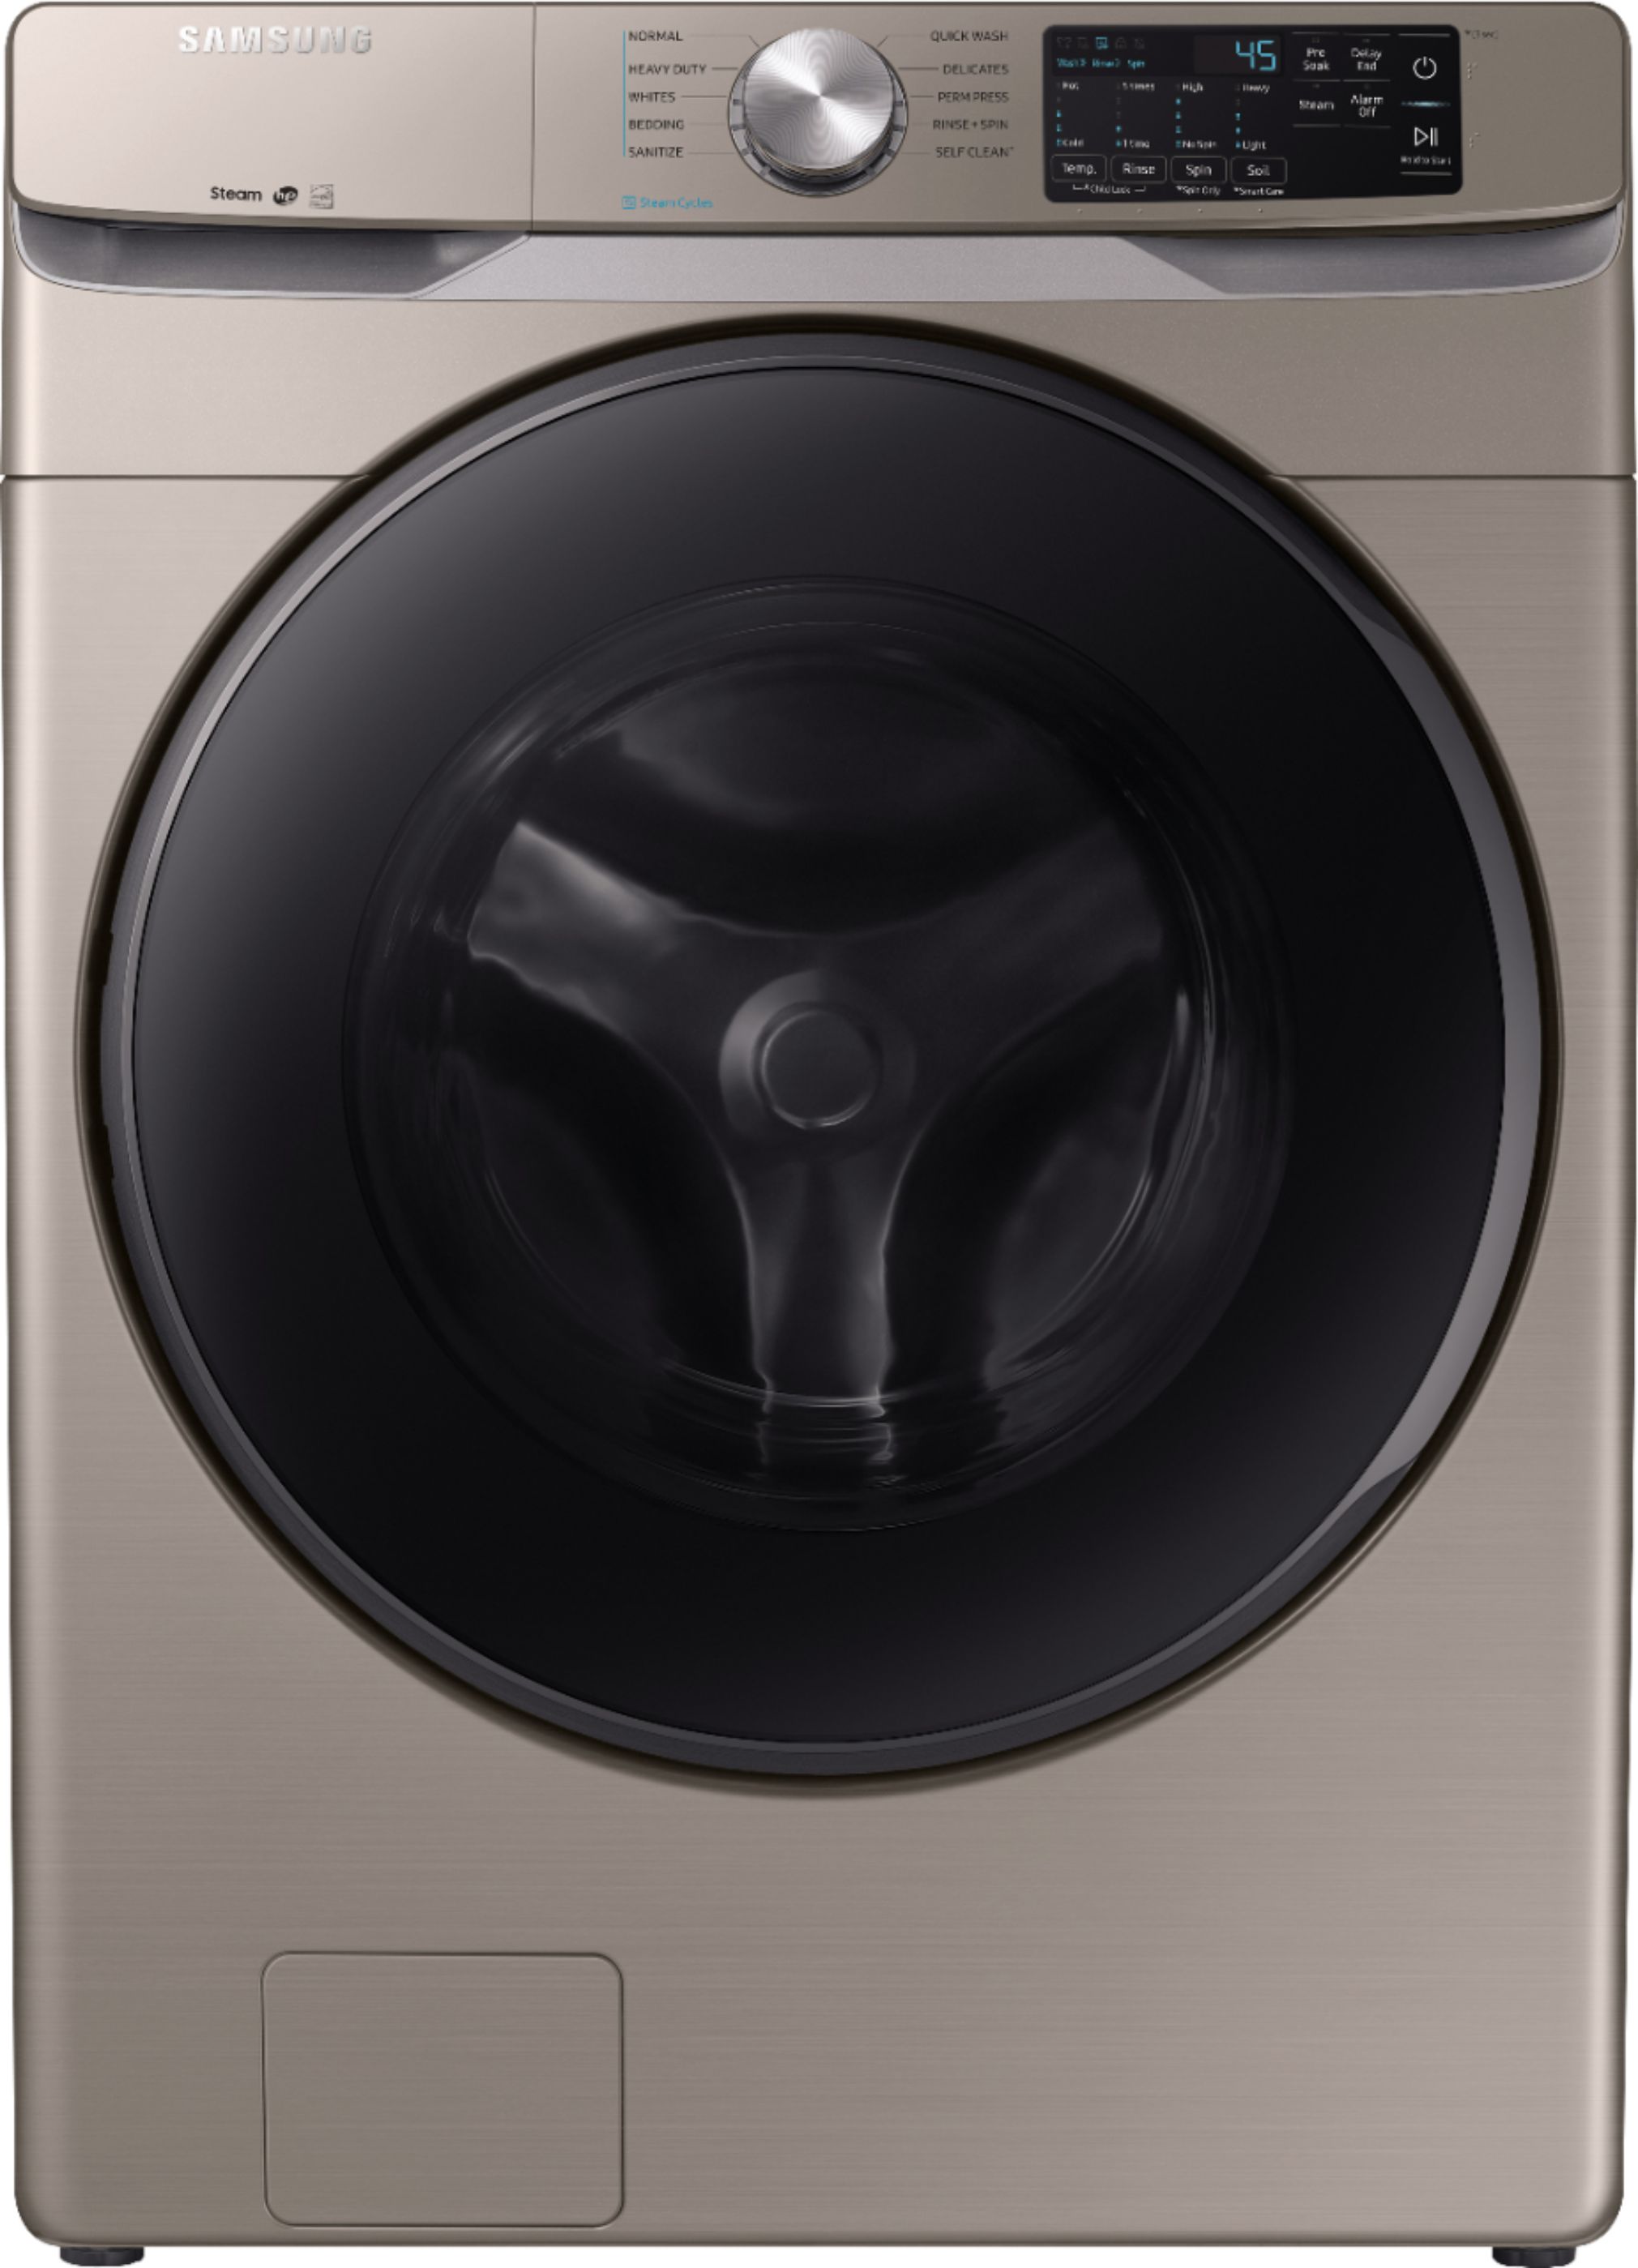 Samsung - 4.5 Cu. Ft. 10-Cycle High-Efficiency Front-Loading Washer with Steam - Champagne